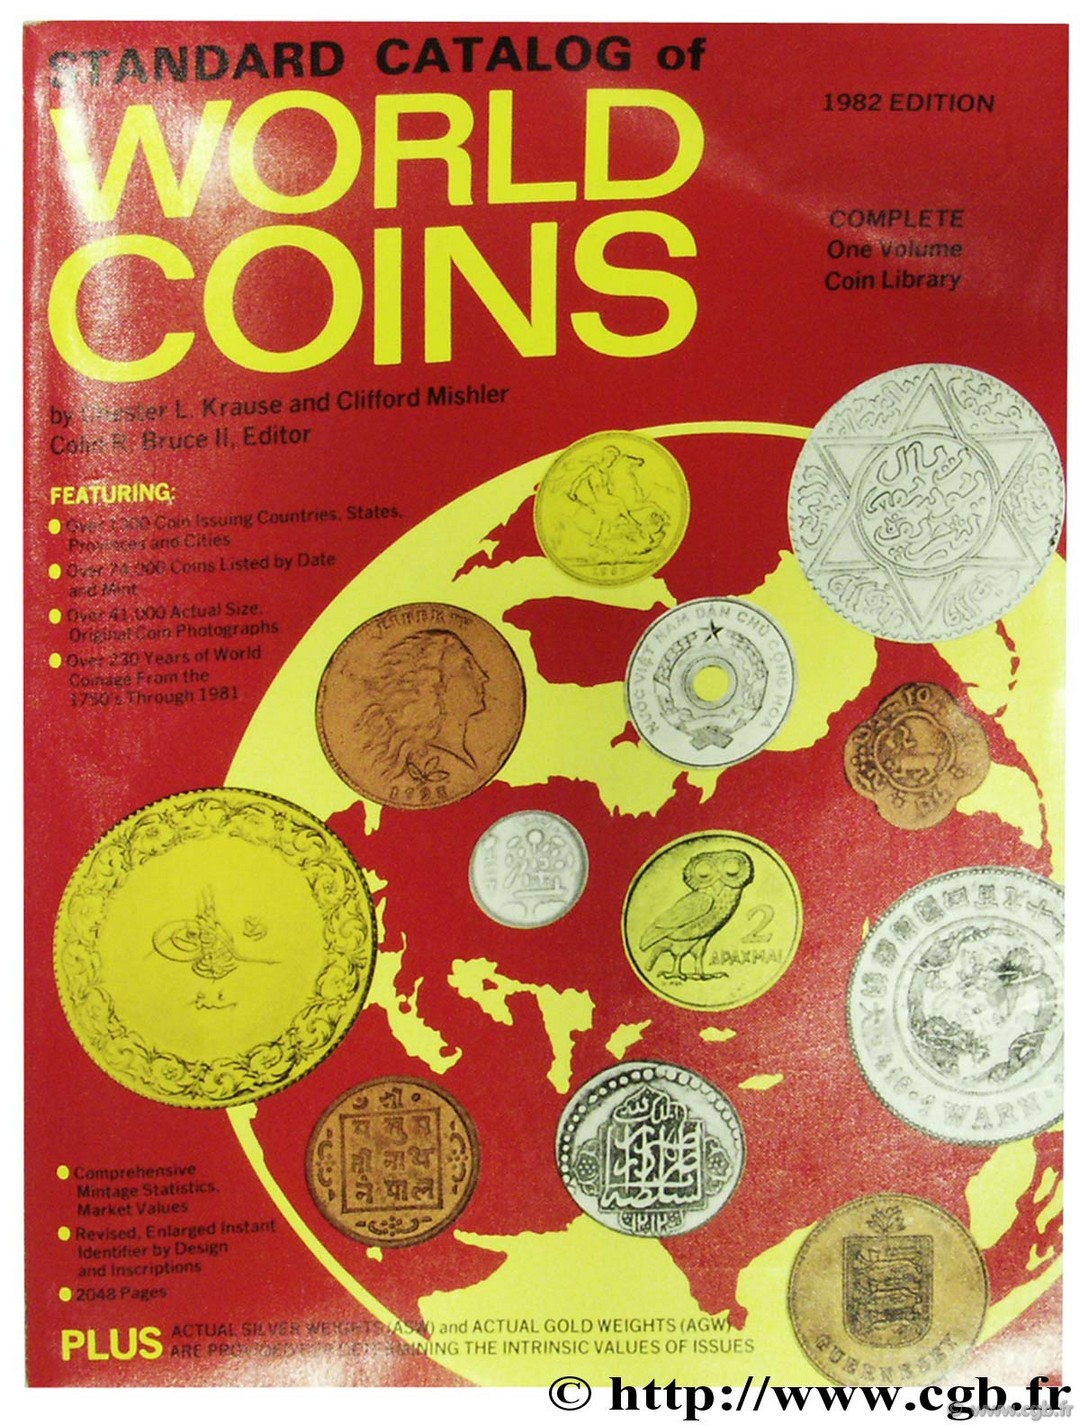 Standard Catalogue of World Coins 1982 edition KRAUSE C.L, MISHLER C